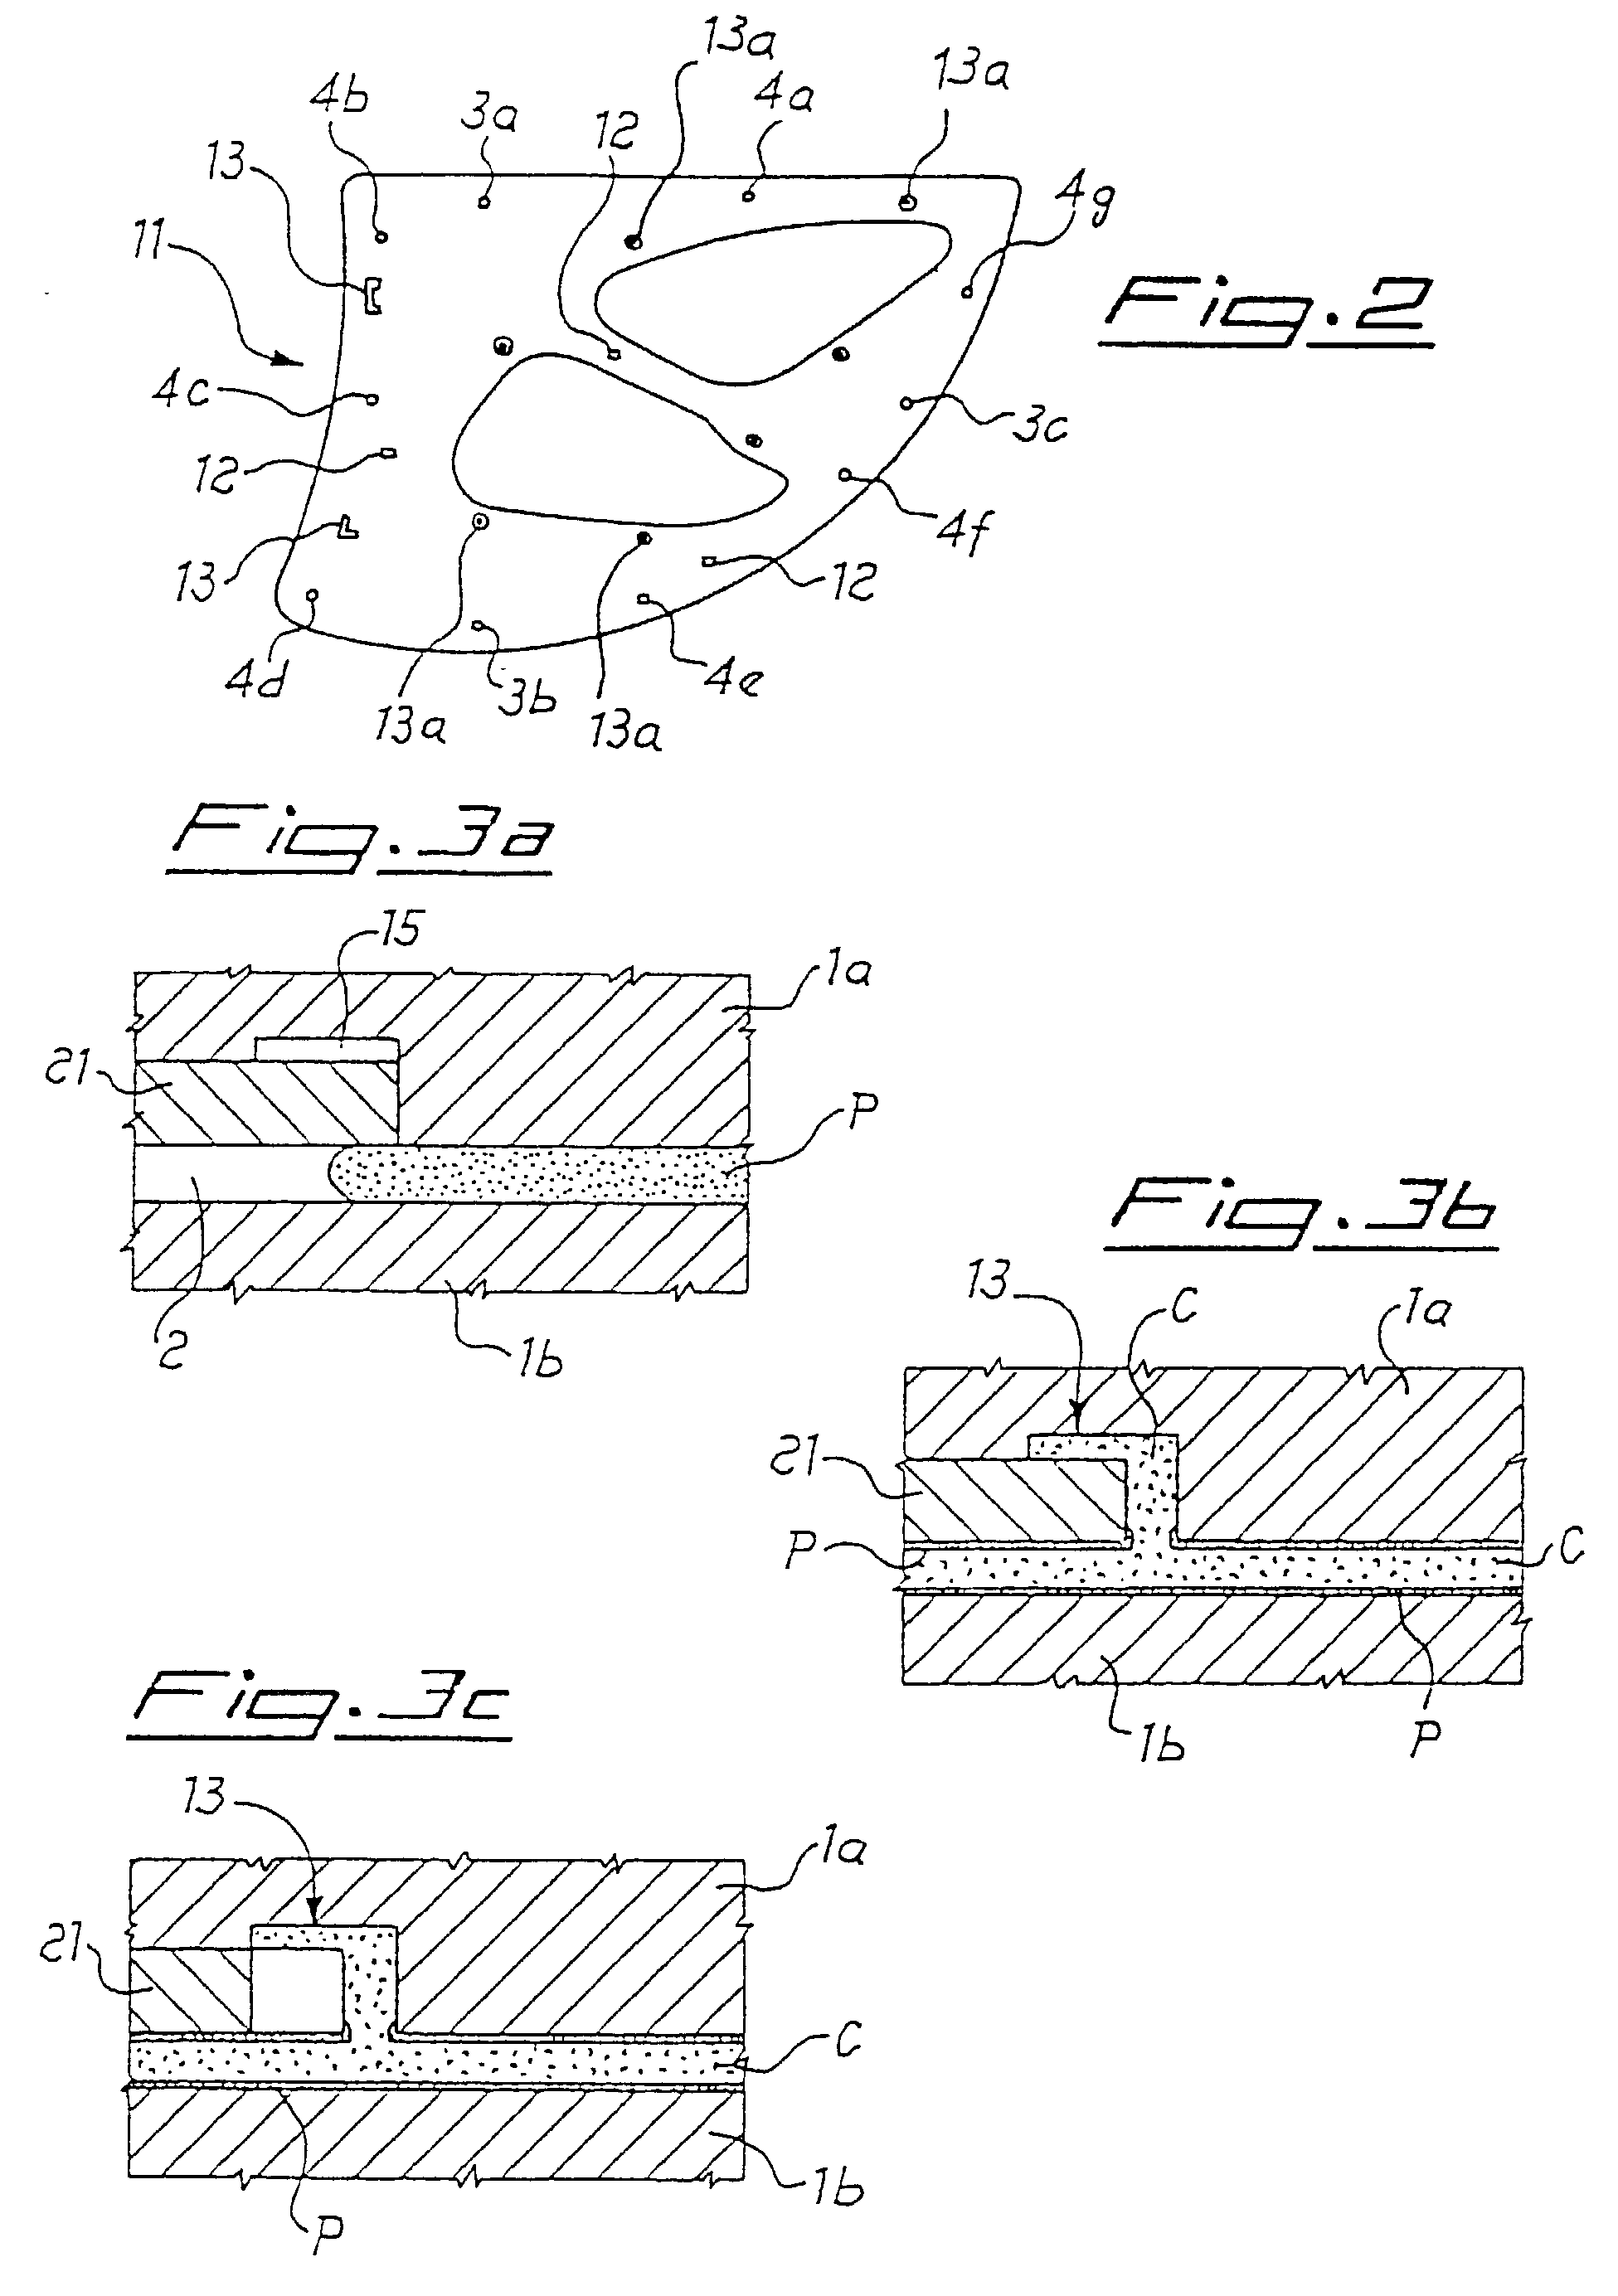 Process and device for coinjection molding multilayer products